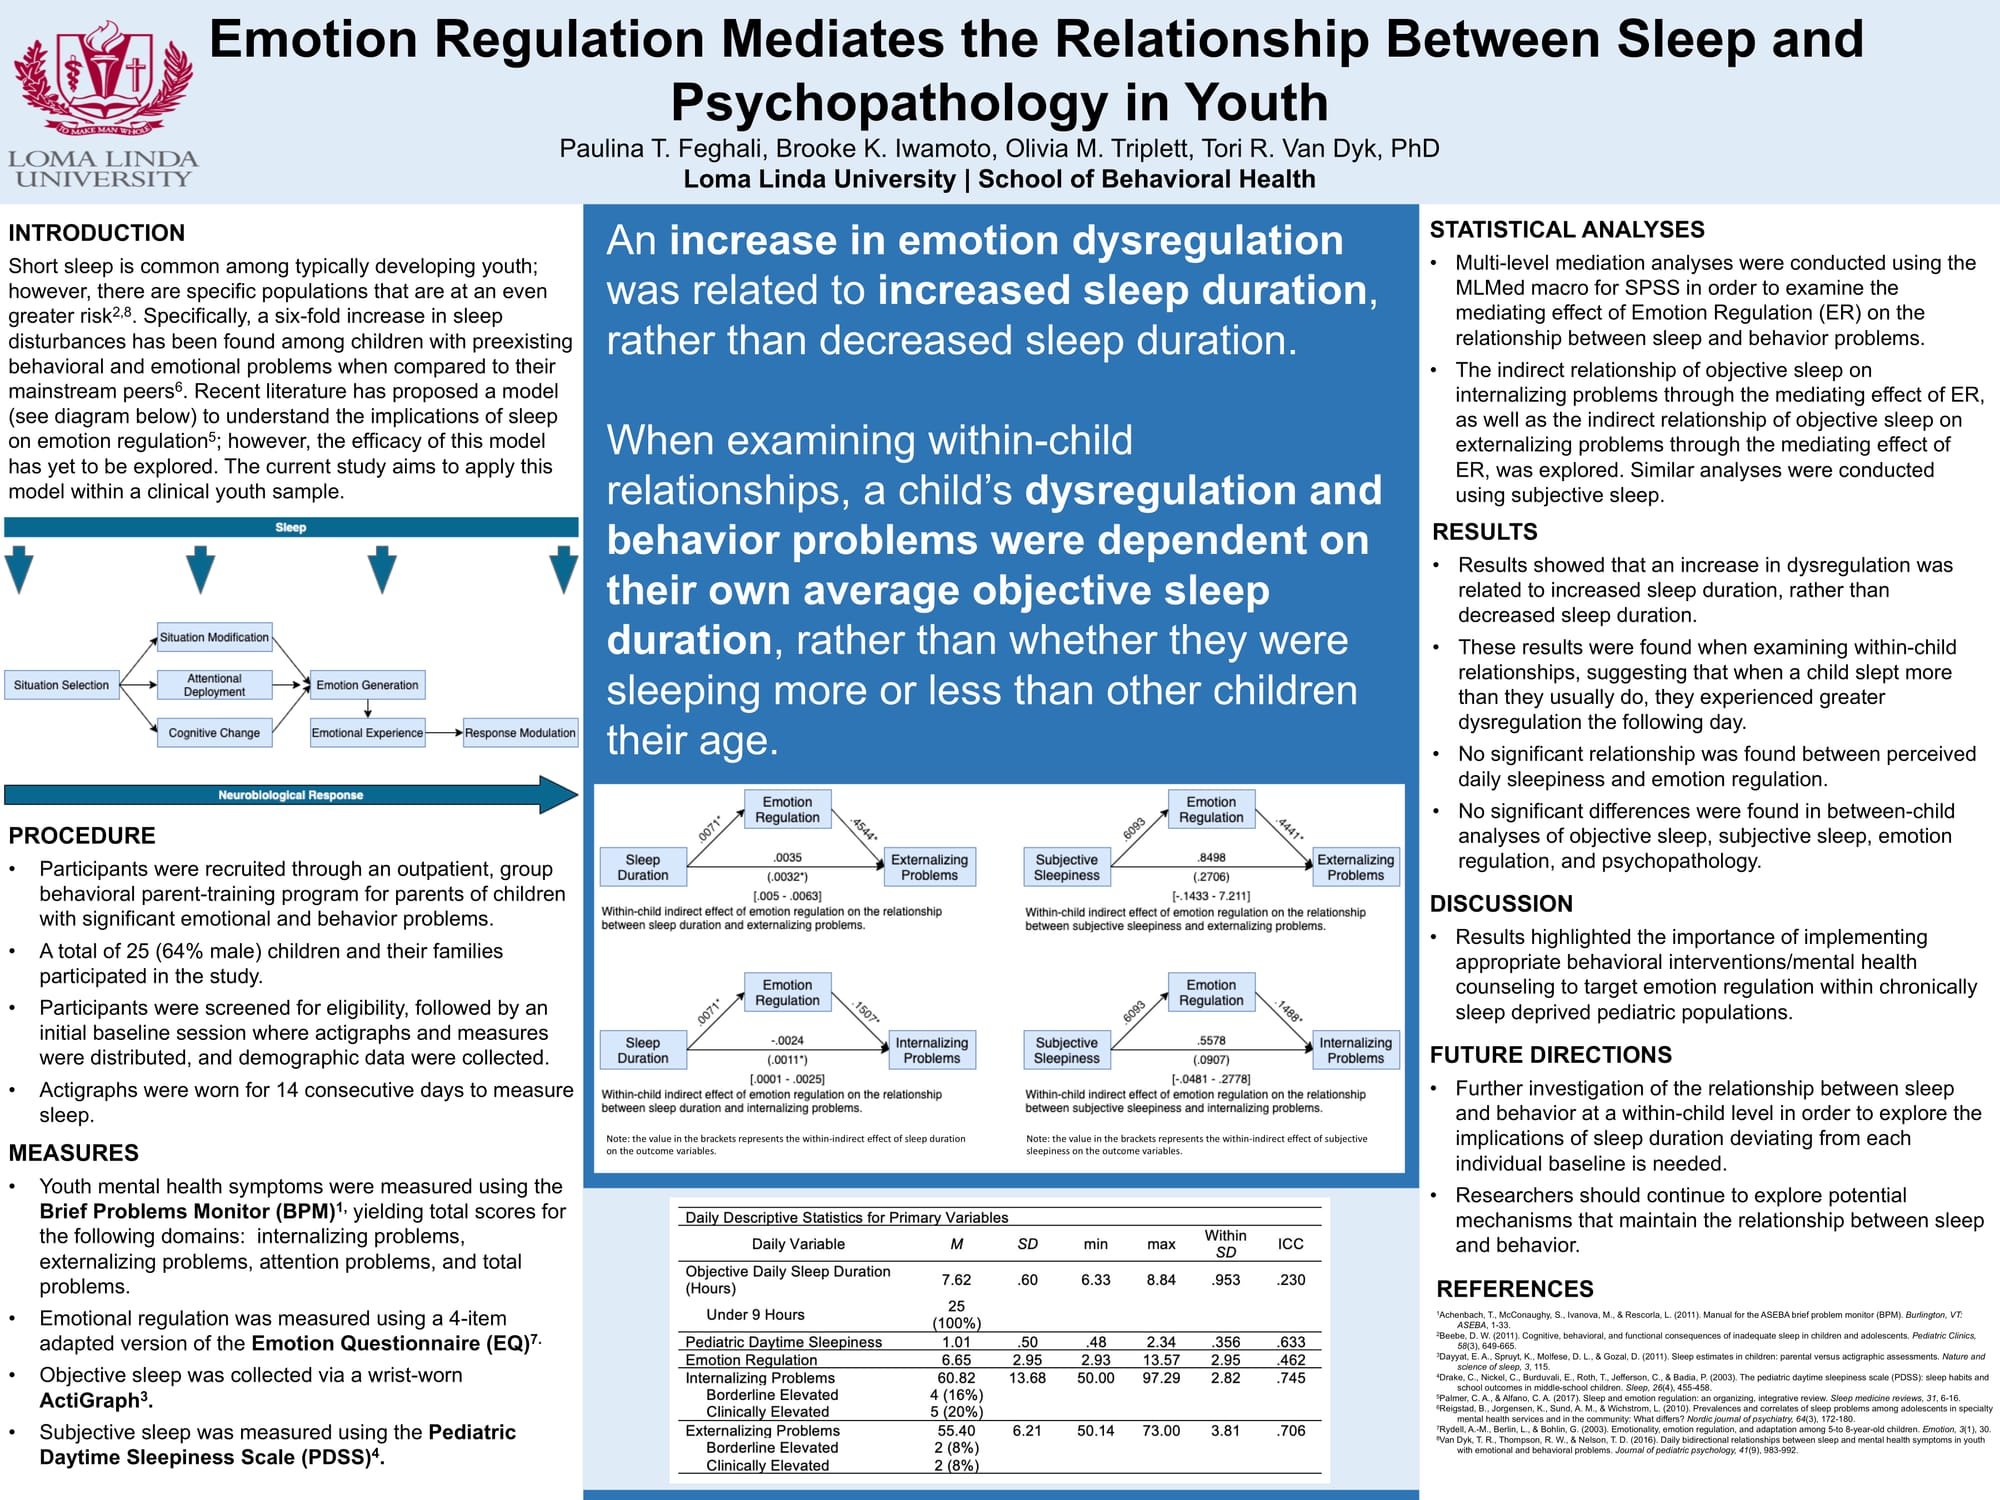 Emotion Regulation Mediates the Relationship Between Sleep and Psychopathology in Youth